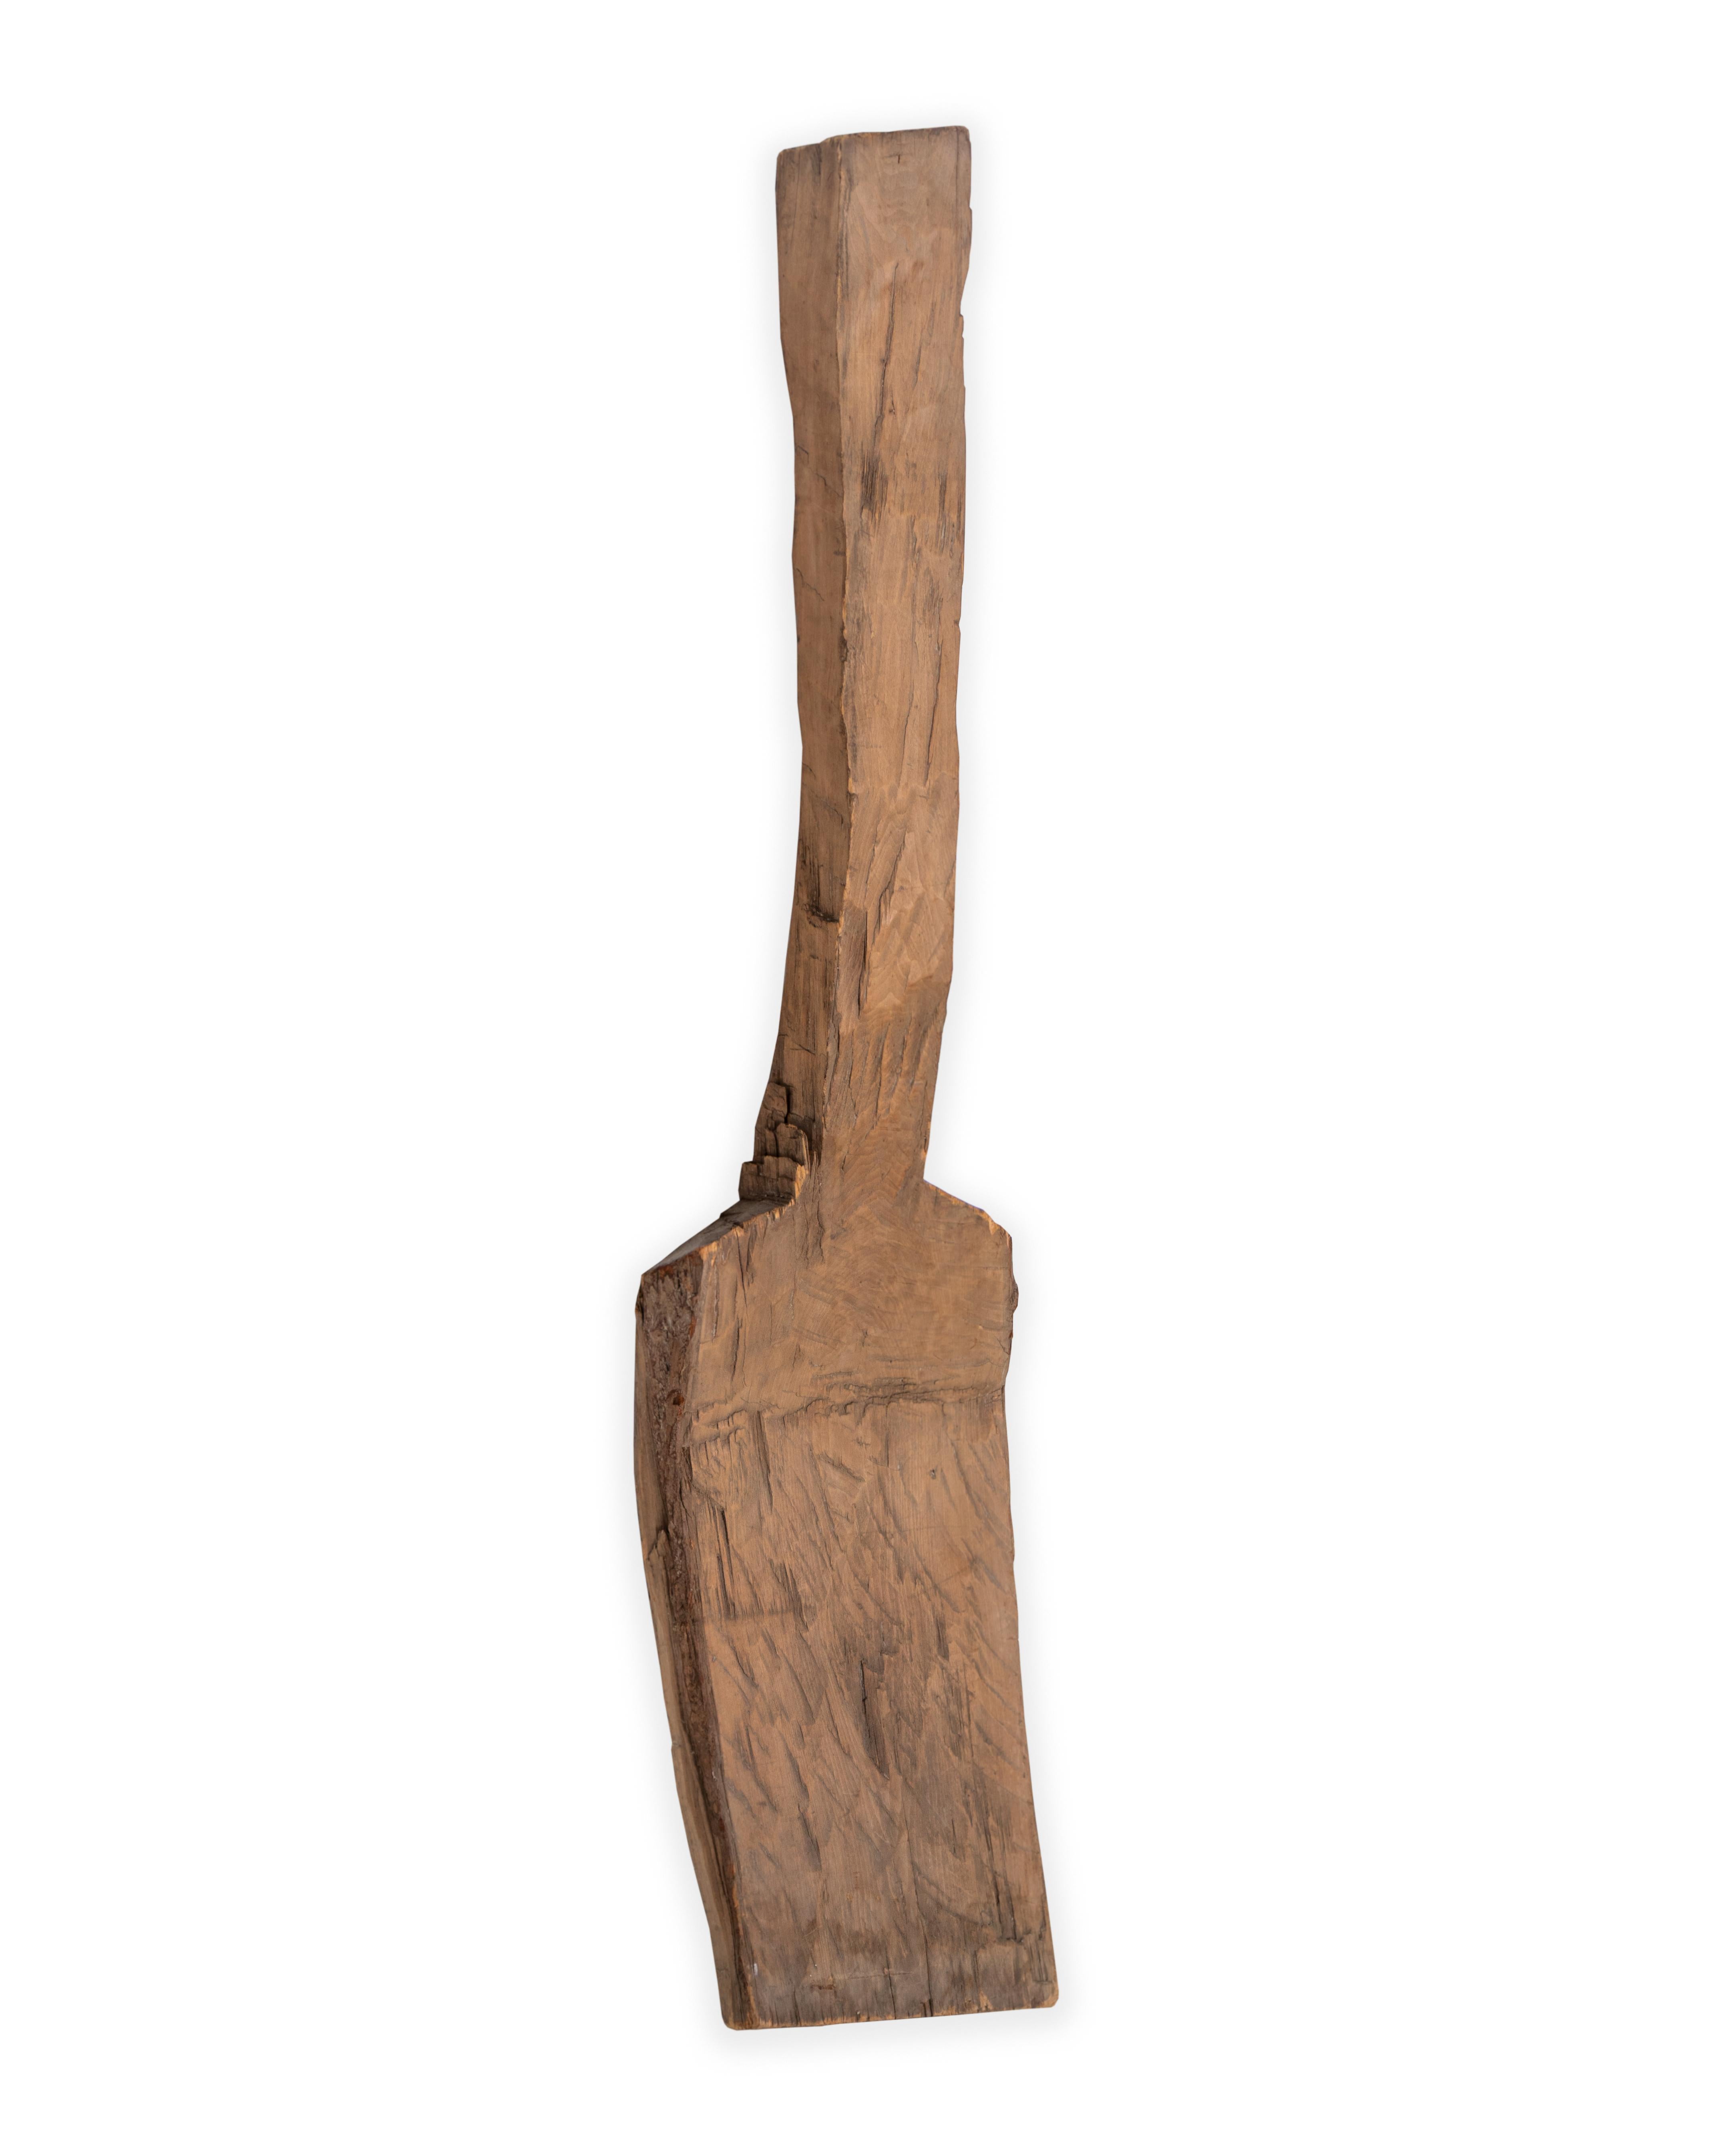 Carved wood folk implement. Vintage find in my organic, contemporary, and mid-century modern style.

Piece from our one of a kind collection, Le Monde. Exclusive to Brendan Bass.